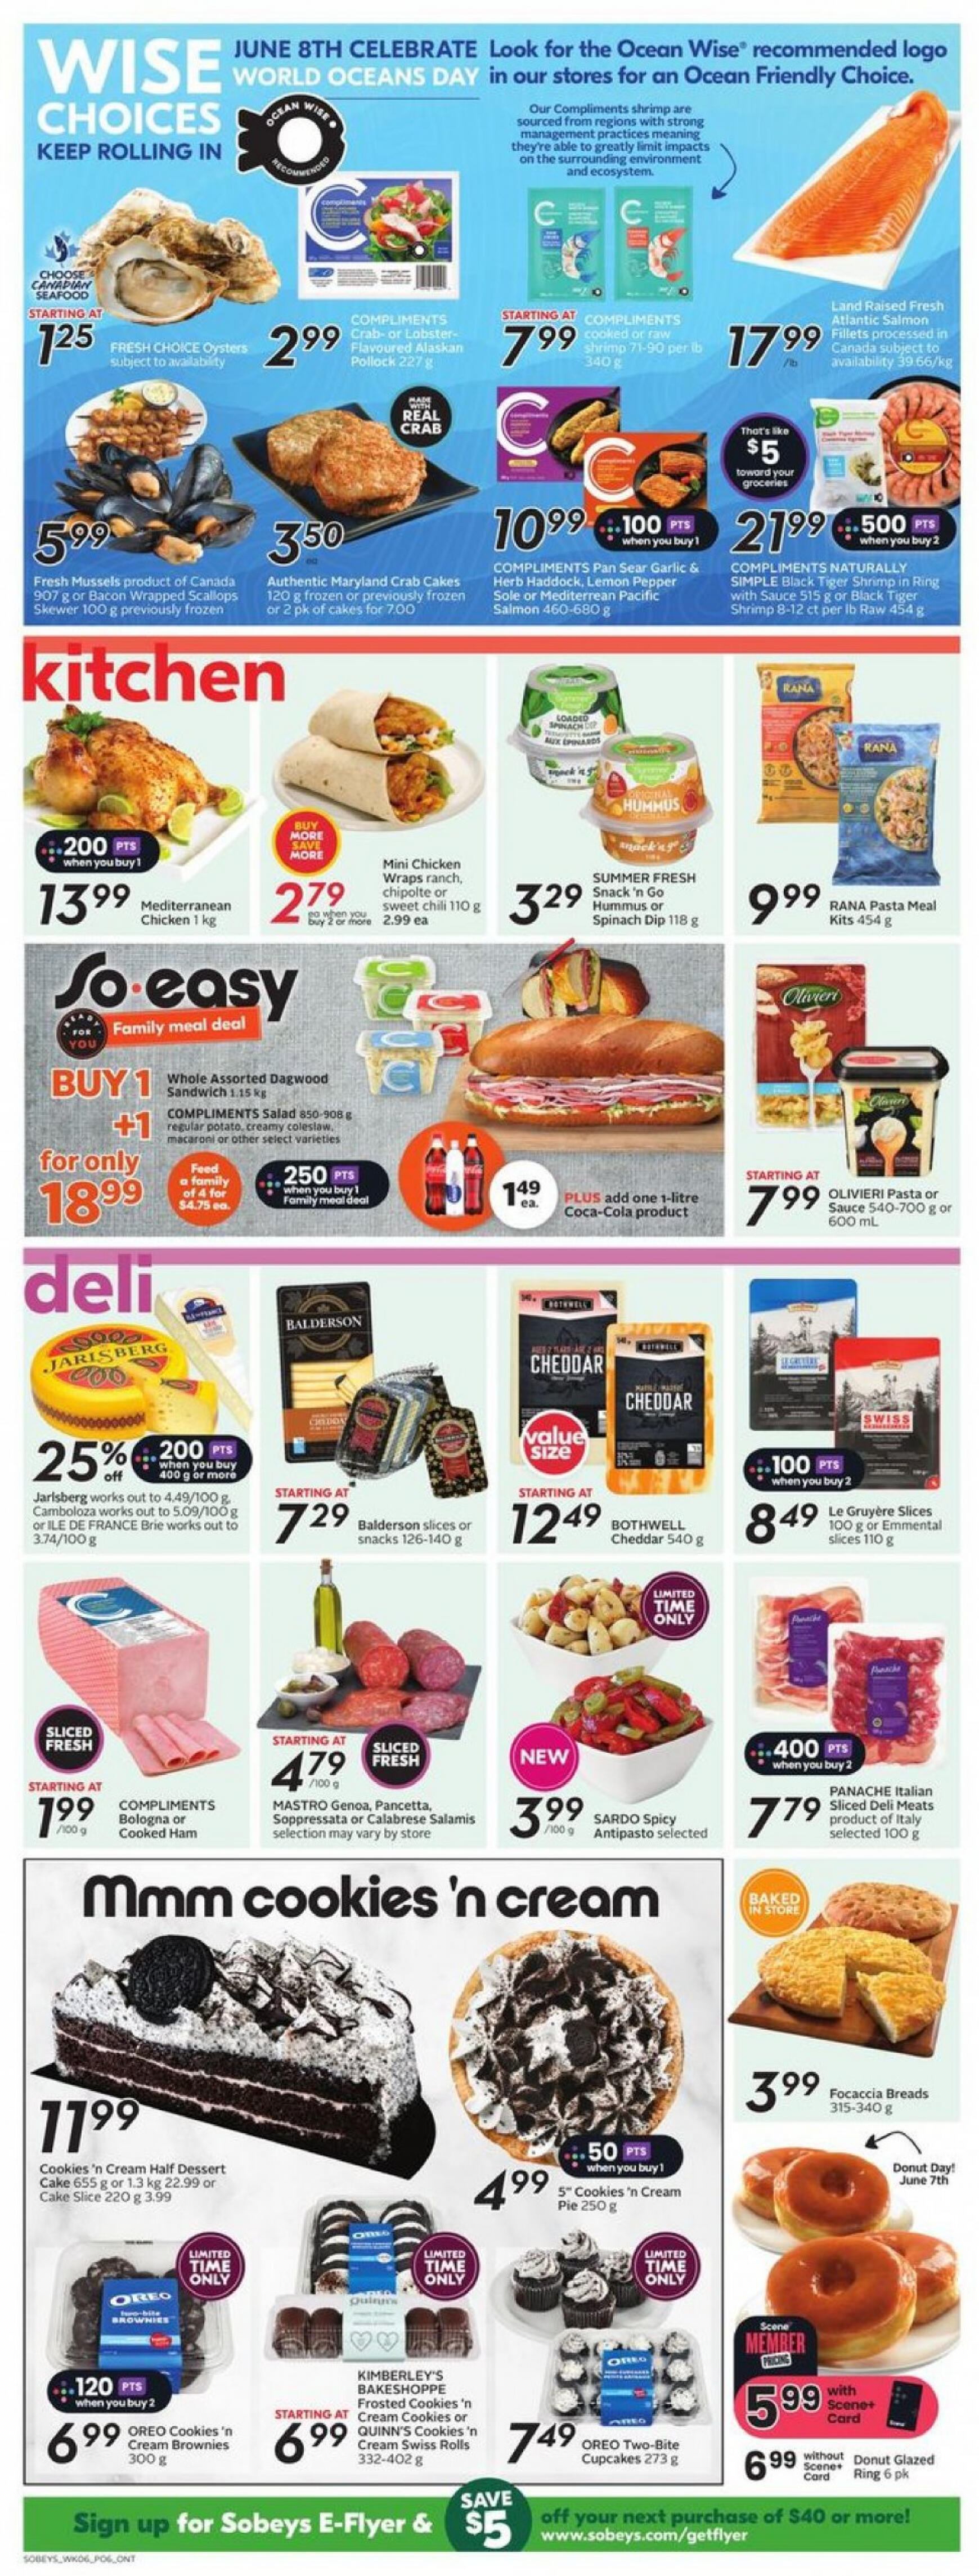 sobeys - Sobeys - Weekly Flyer - Ontario flyer current 06.06. - 12.06. - page: 12